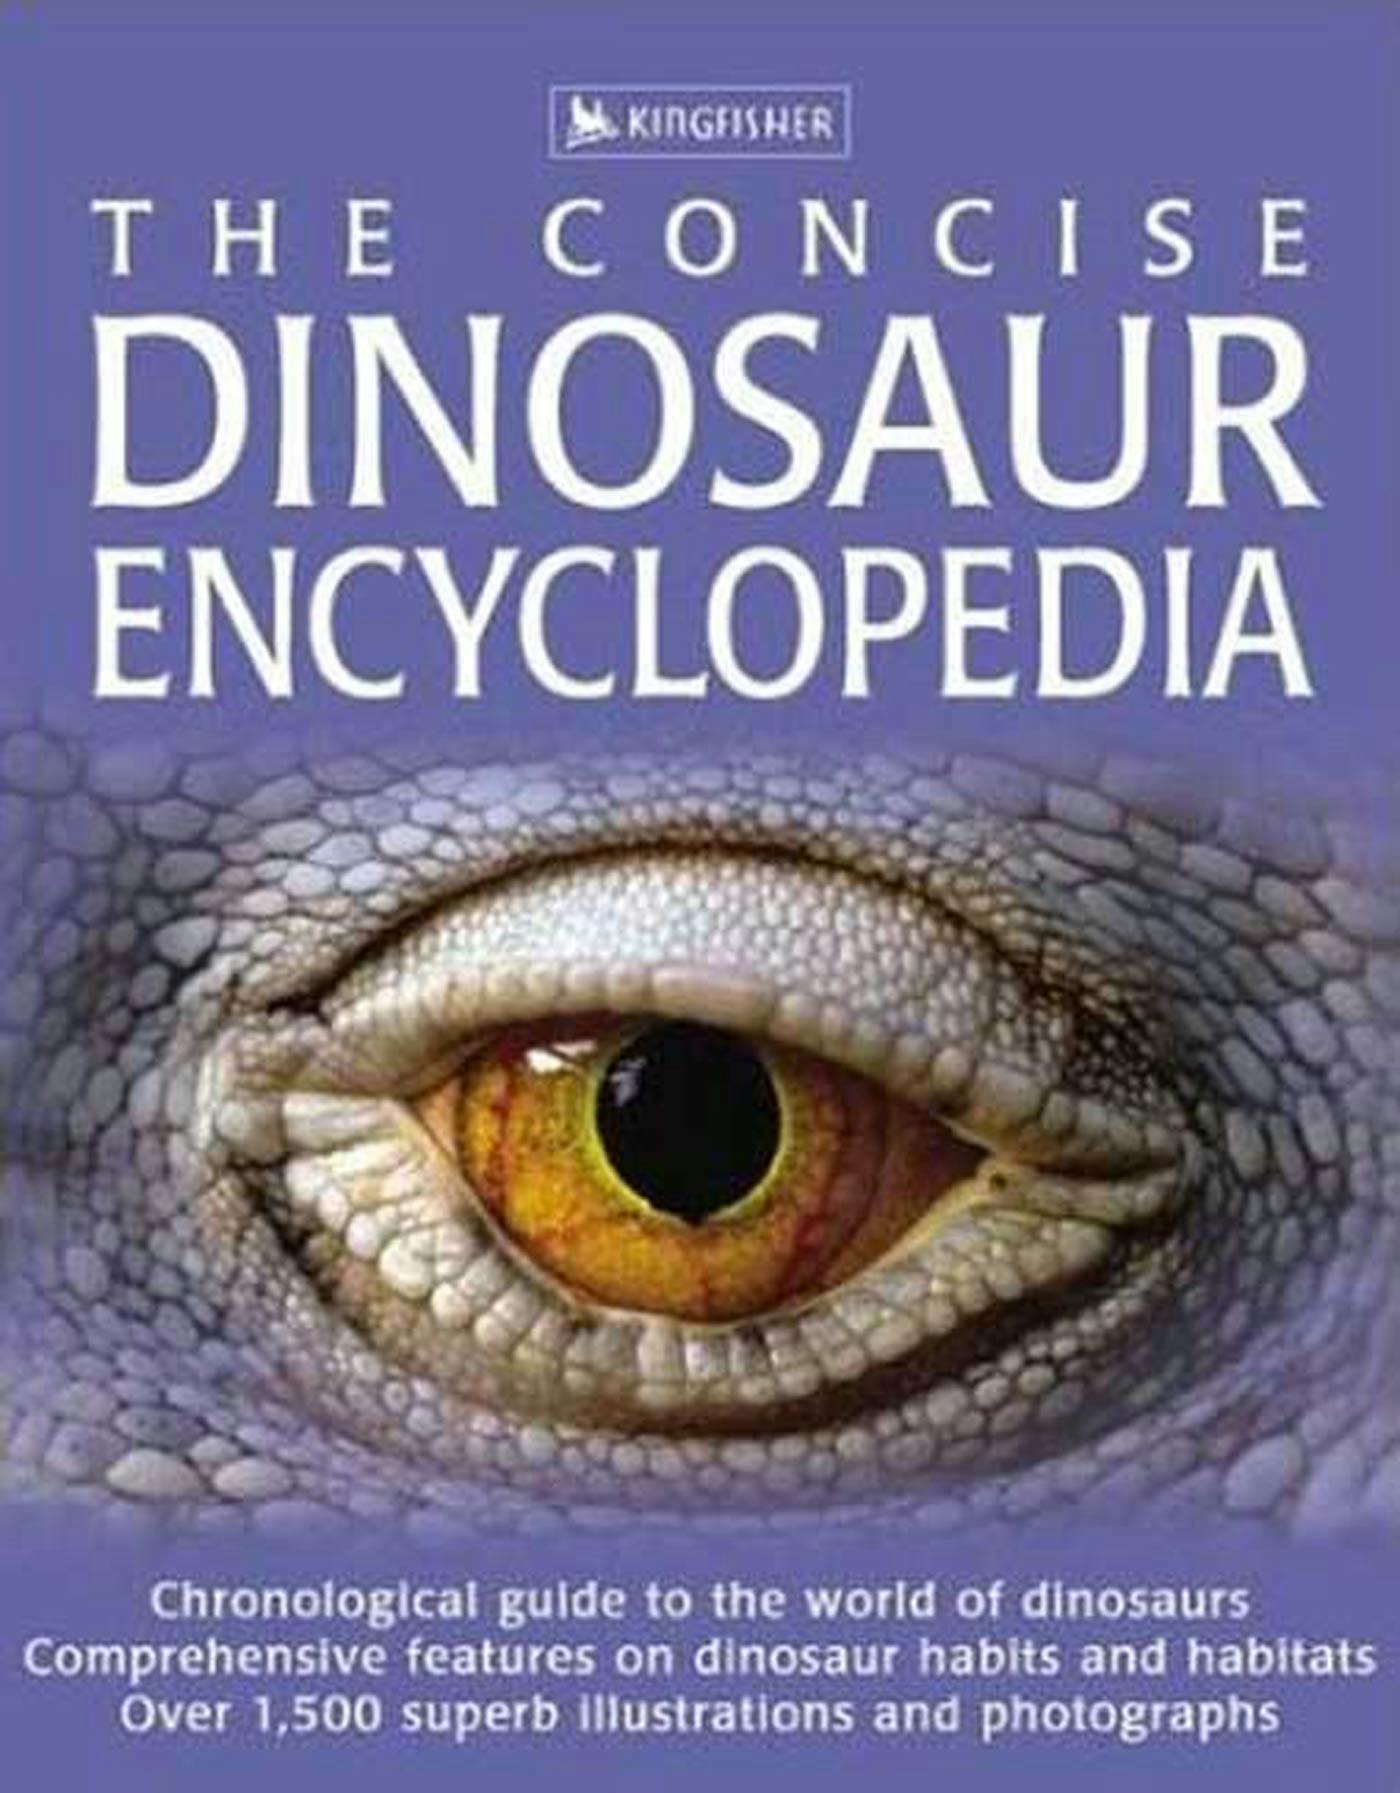 Image of The Concise Dinosaur Encyclopedia